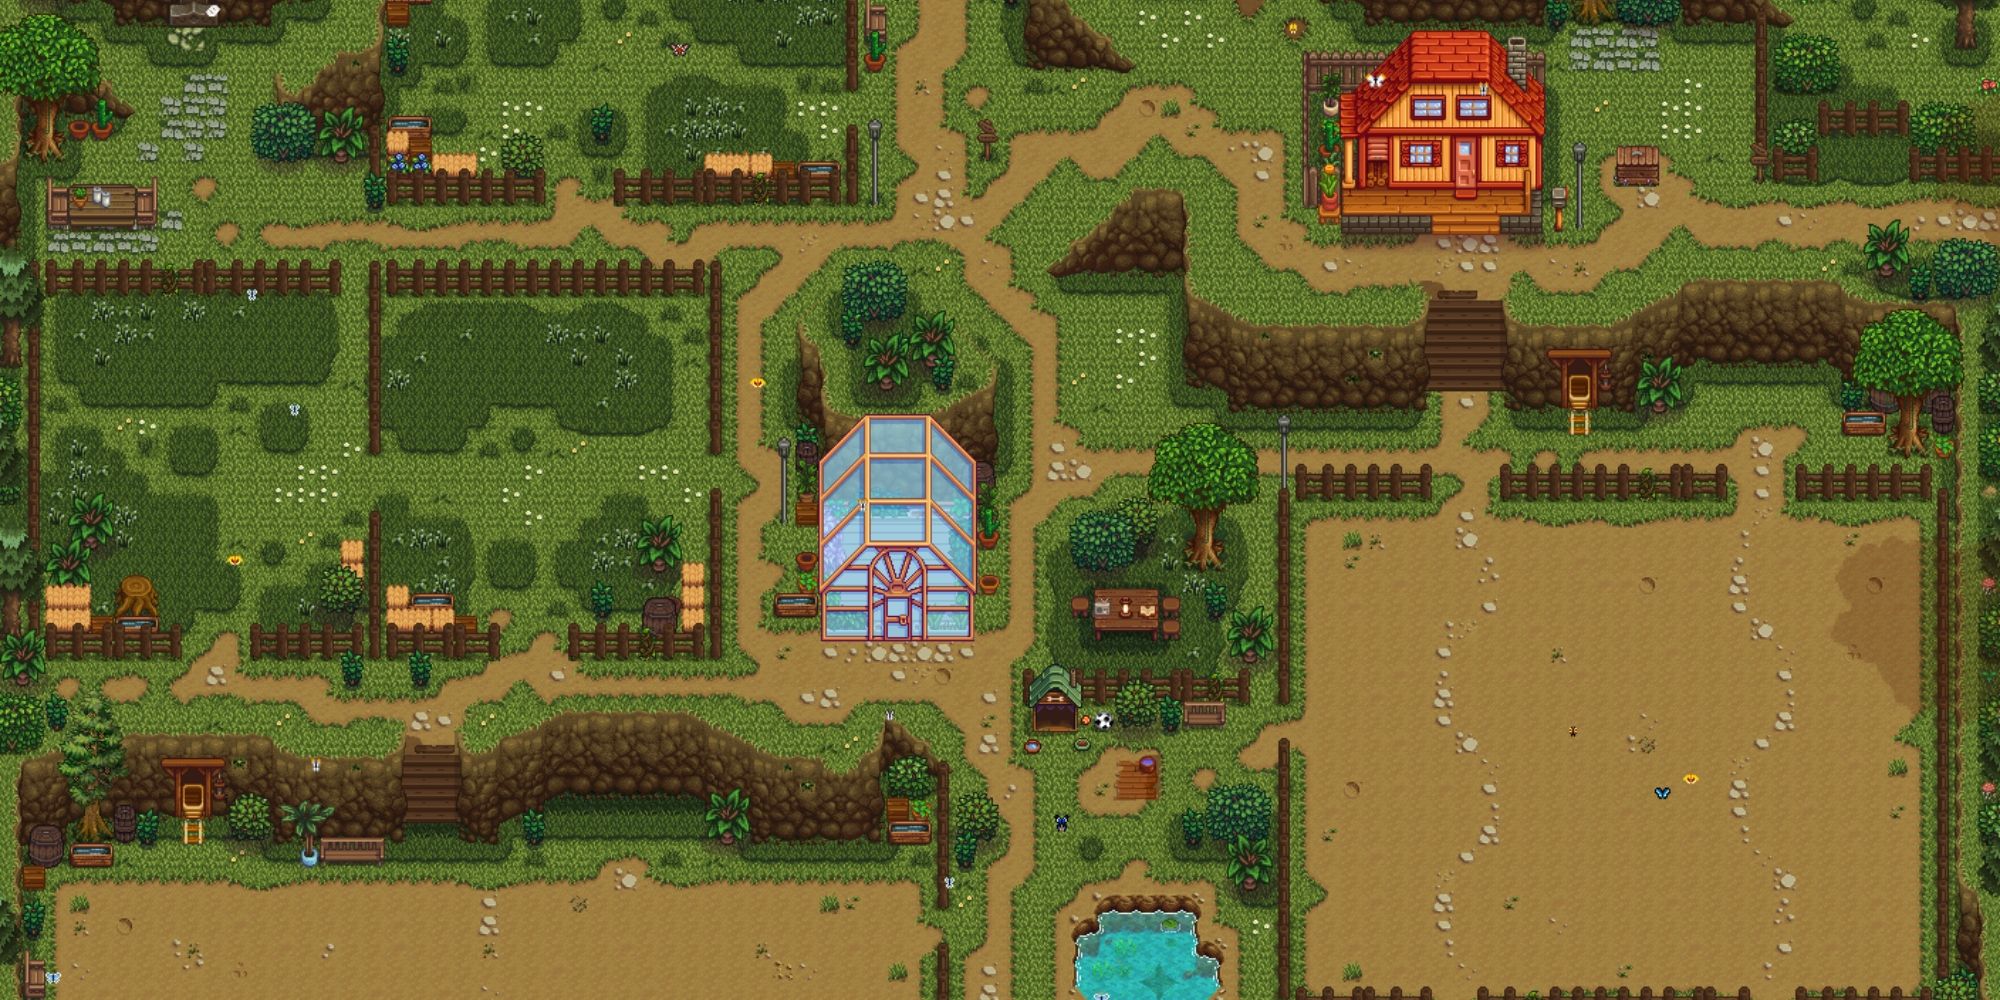 A Stardew Valley farm map with a fenced in plot for your crops and two fenced pens for your animals